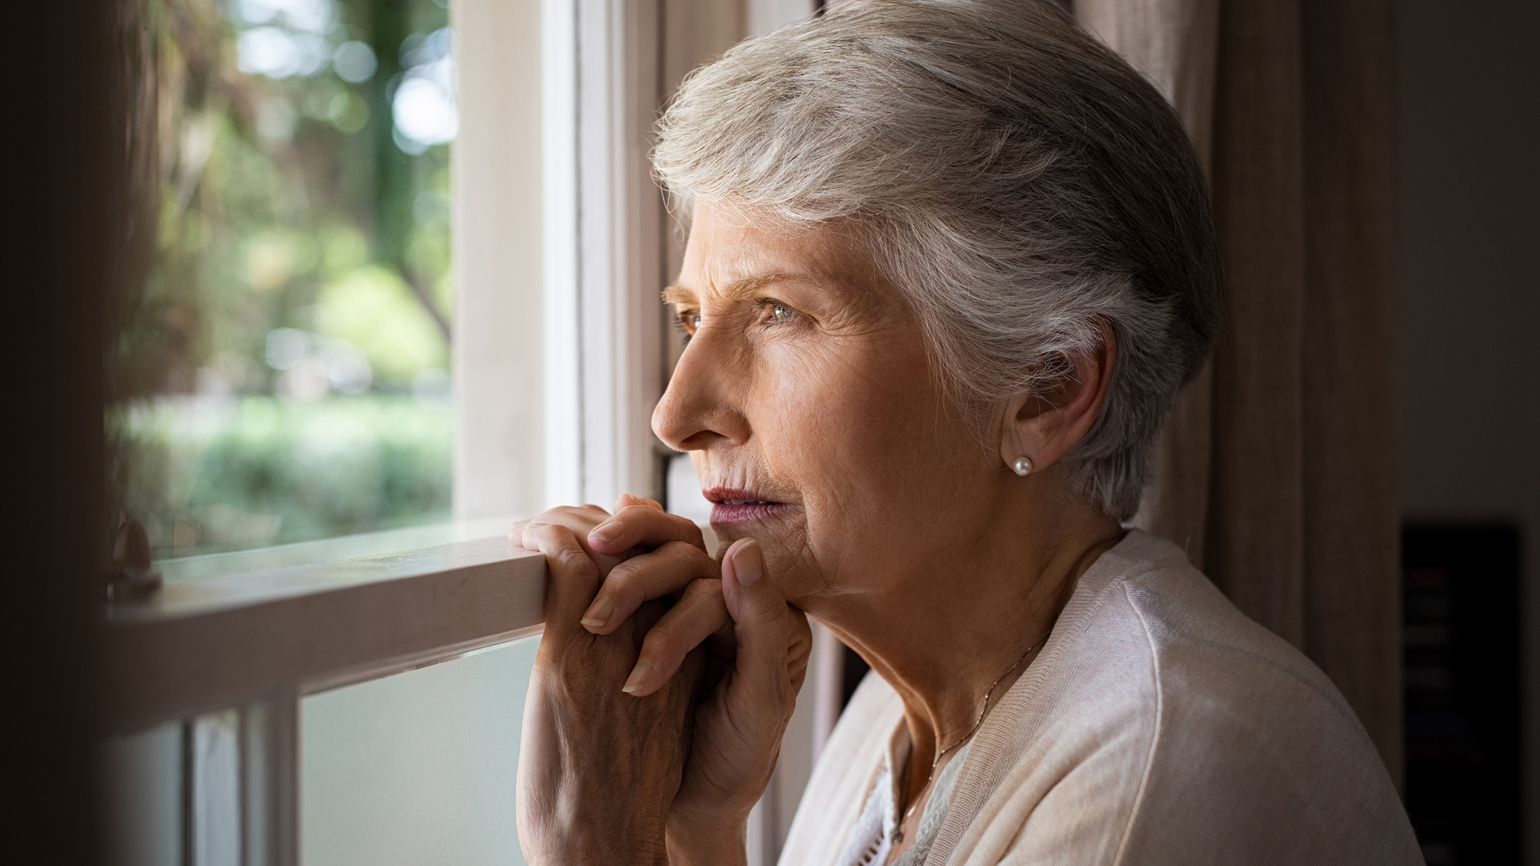 A senior woman looking contemplative out of a window.